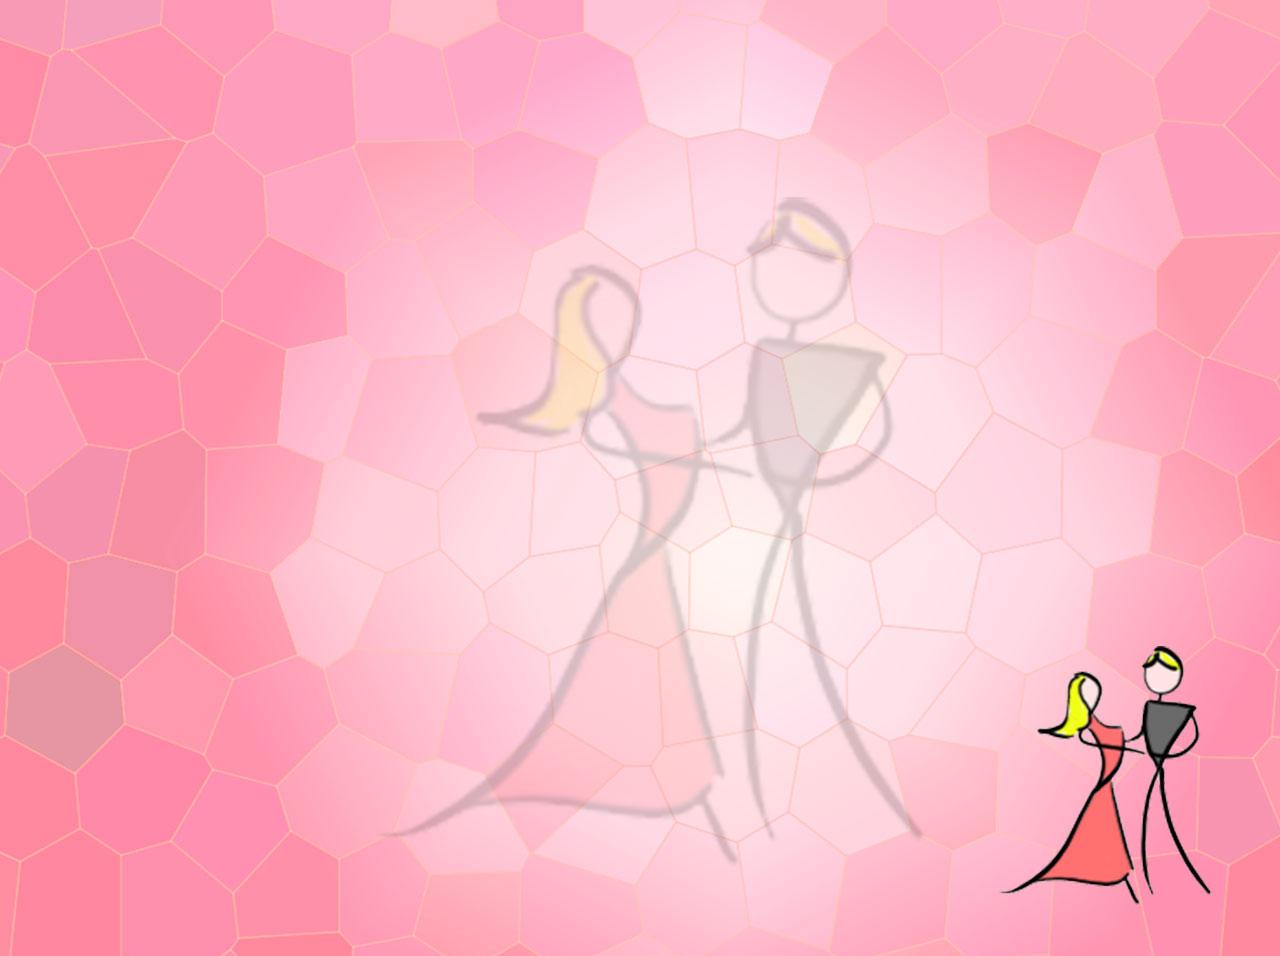 Dance Love backgrounds